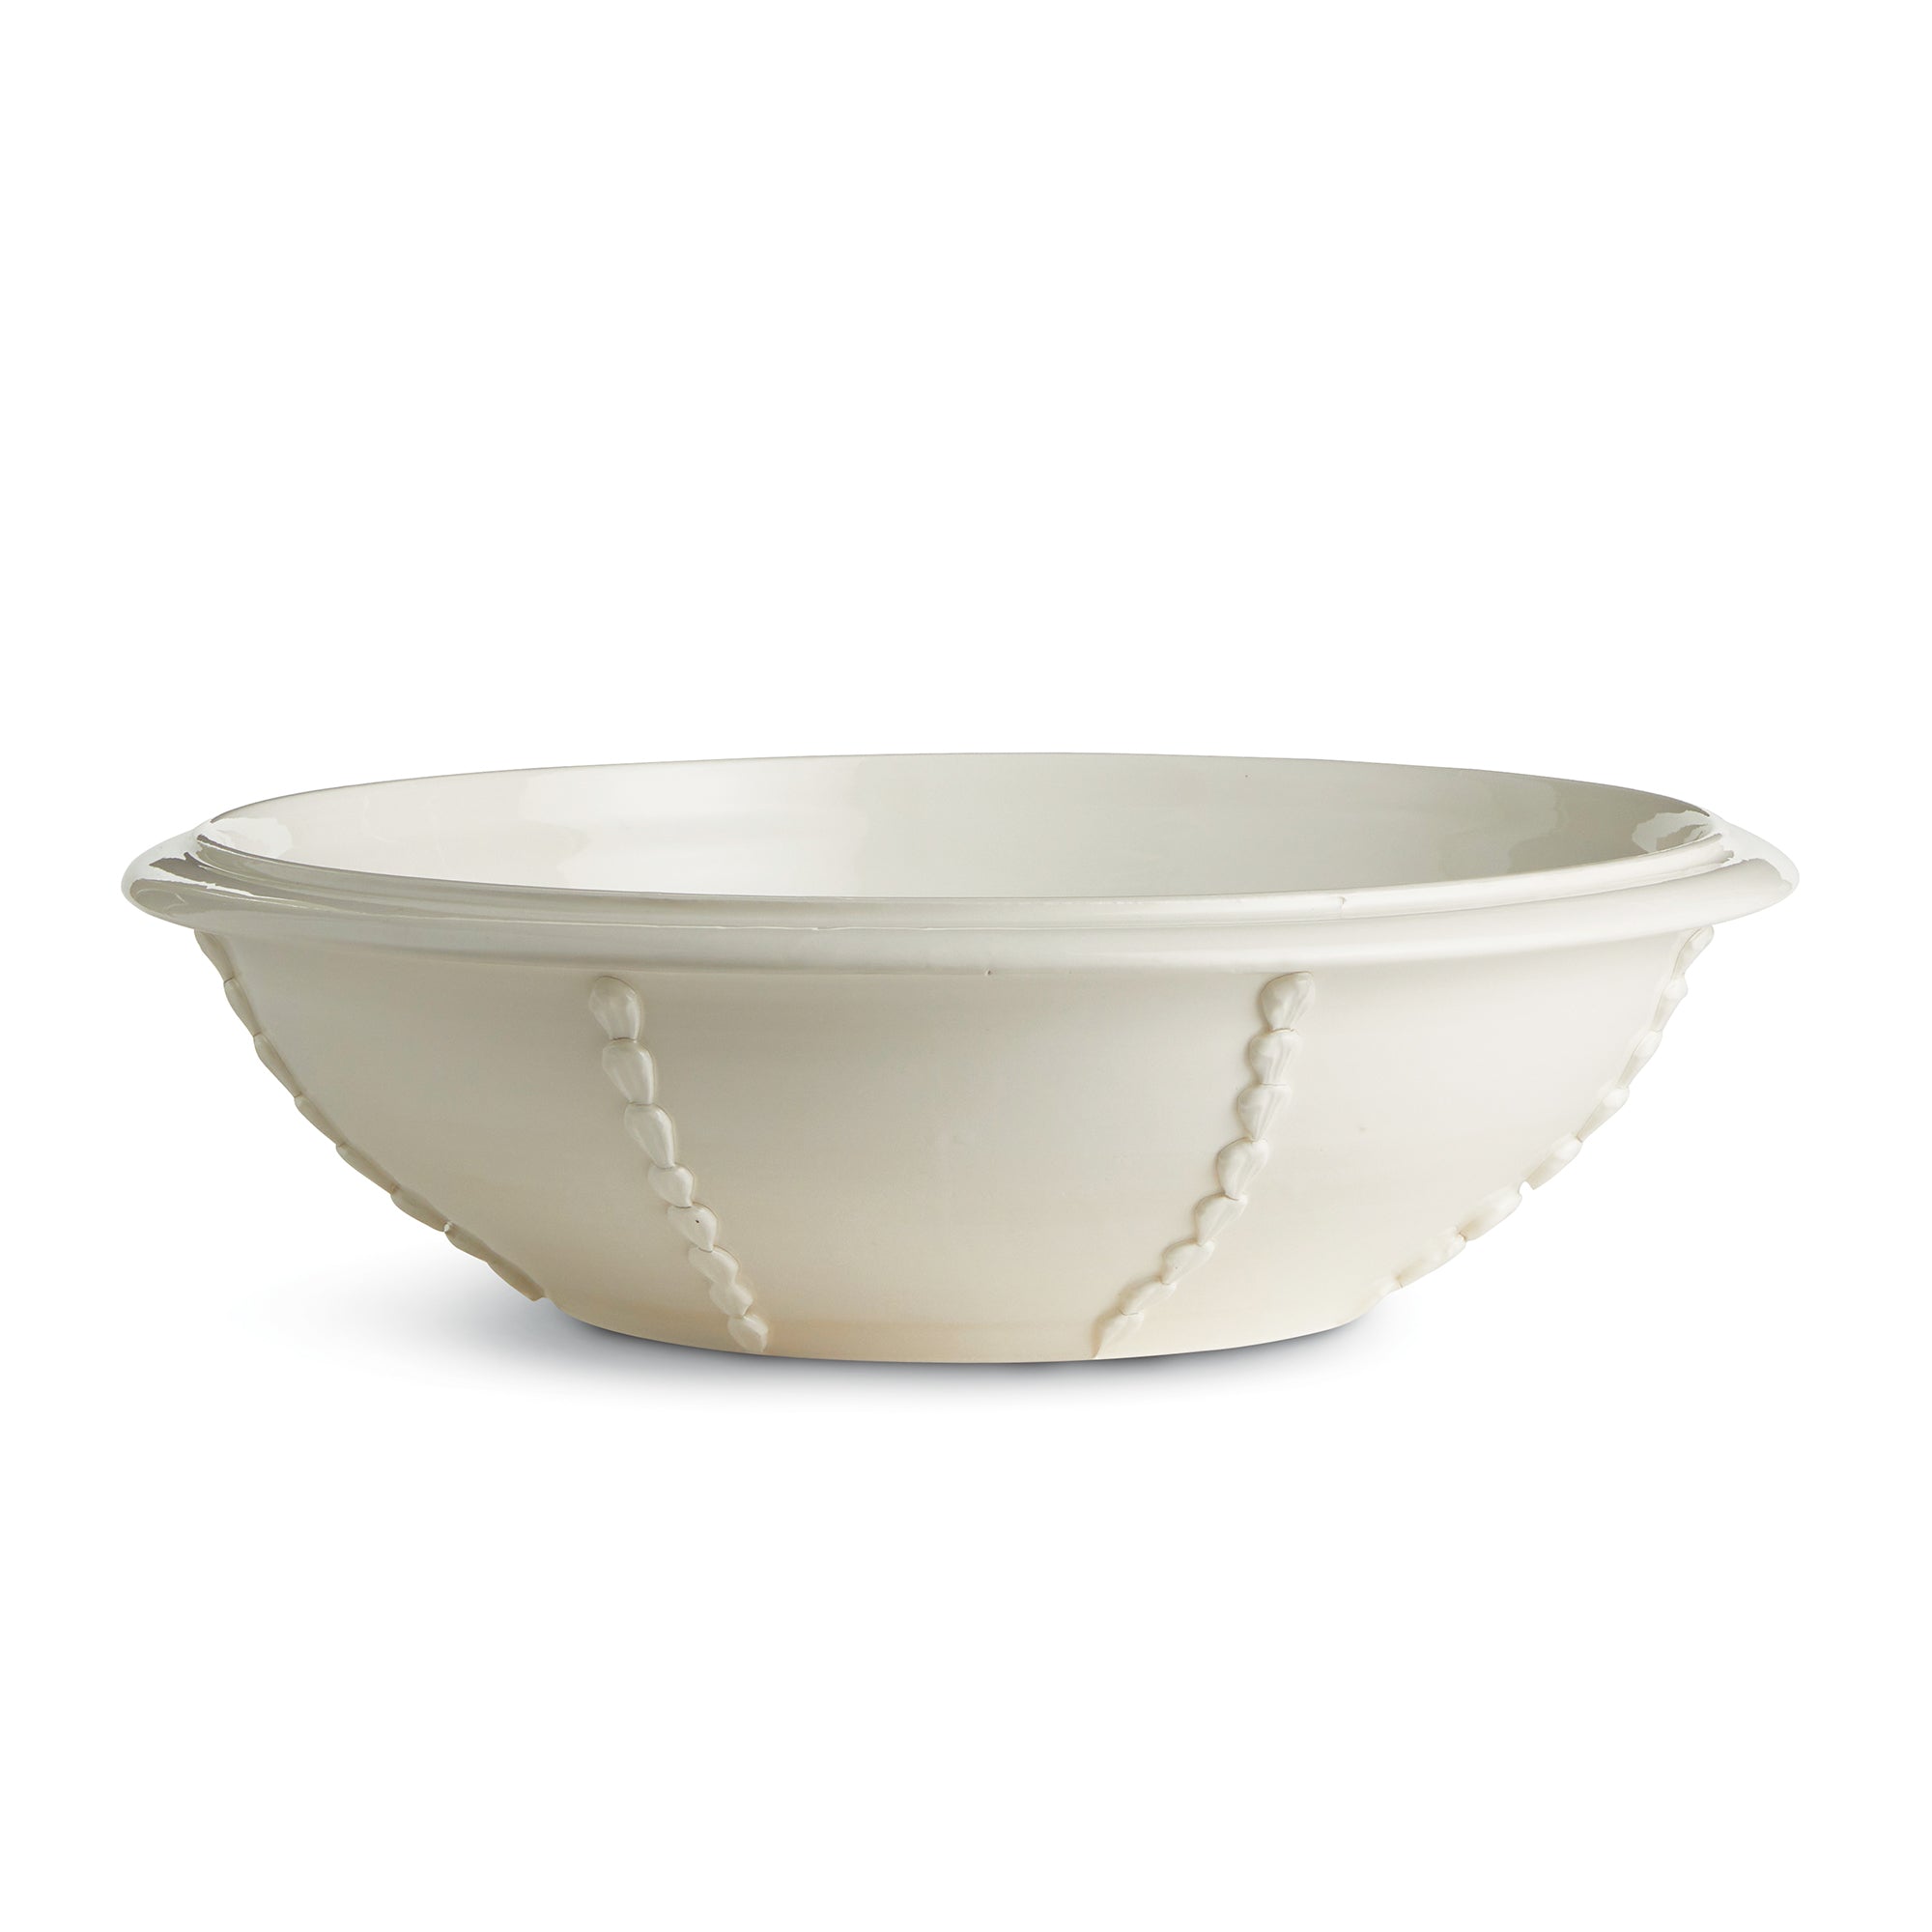 The Positano Decorative Bowl is handmade by Italian artisans in Tuscany, Italy. With a classic Italian craftsmanship passed down through generations, each piece is a true original. Each shell form is hand-applied, in a linear pattern creating a traditional classic look. Designed in grand scale, a  real masterpiece for feature table, kitchen island or mantel. Amethyst Home provides interior design, new construction, custom furniture, and area rugs in the Miami metro area.